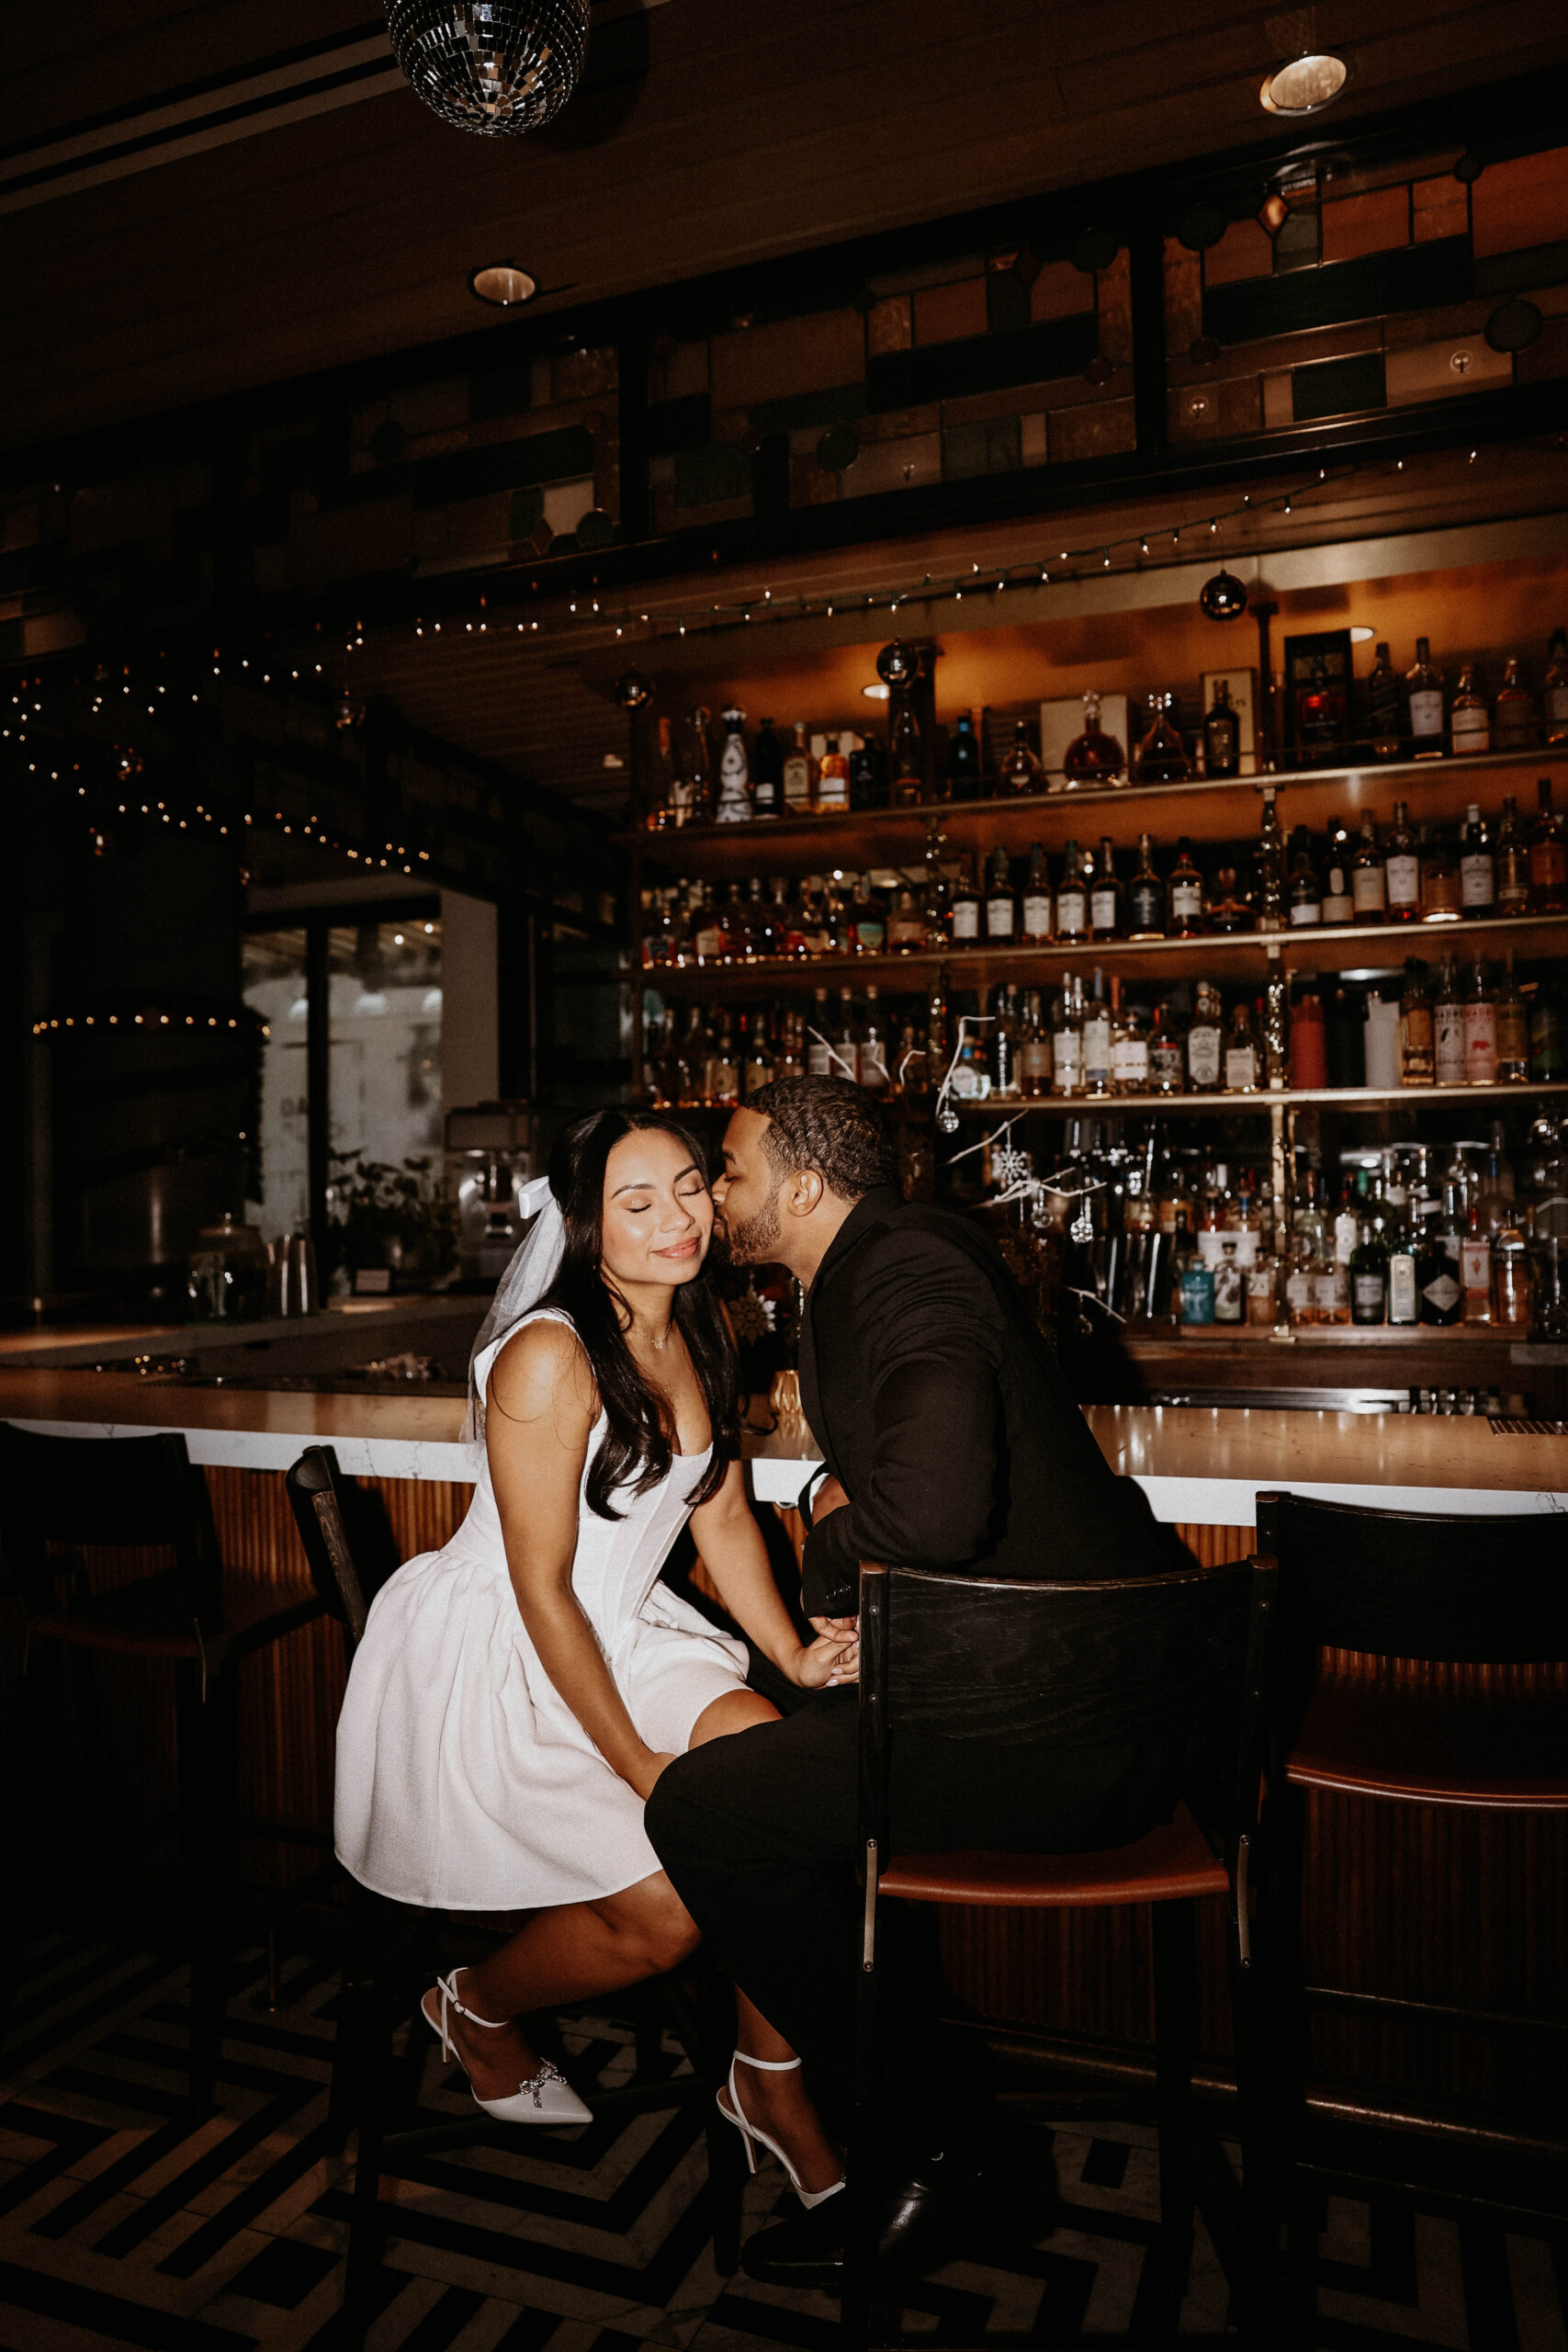 fiance kissing other fiance on the cheek at the bar 